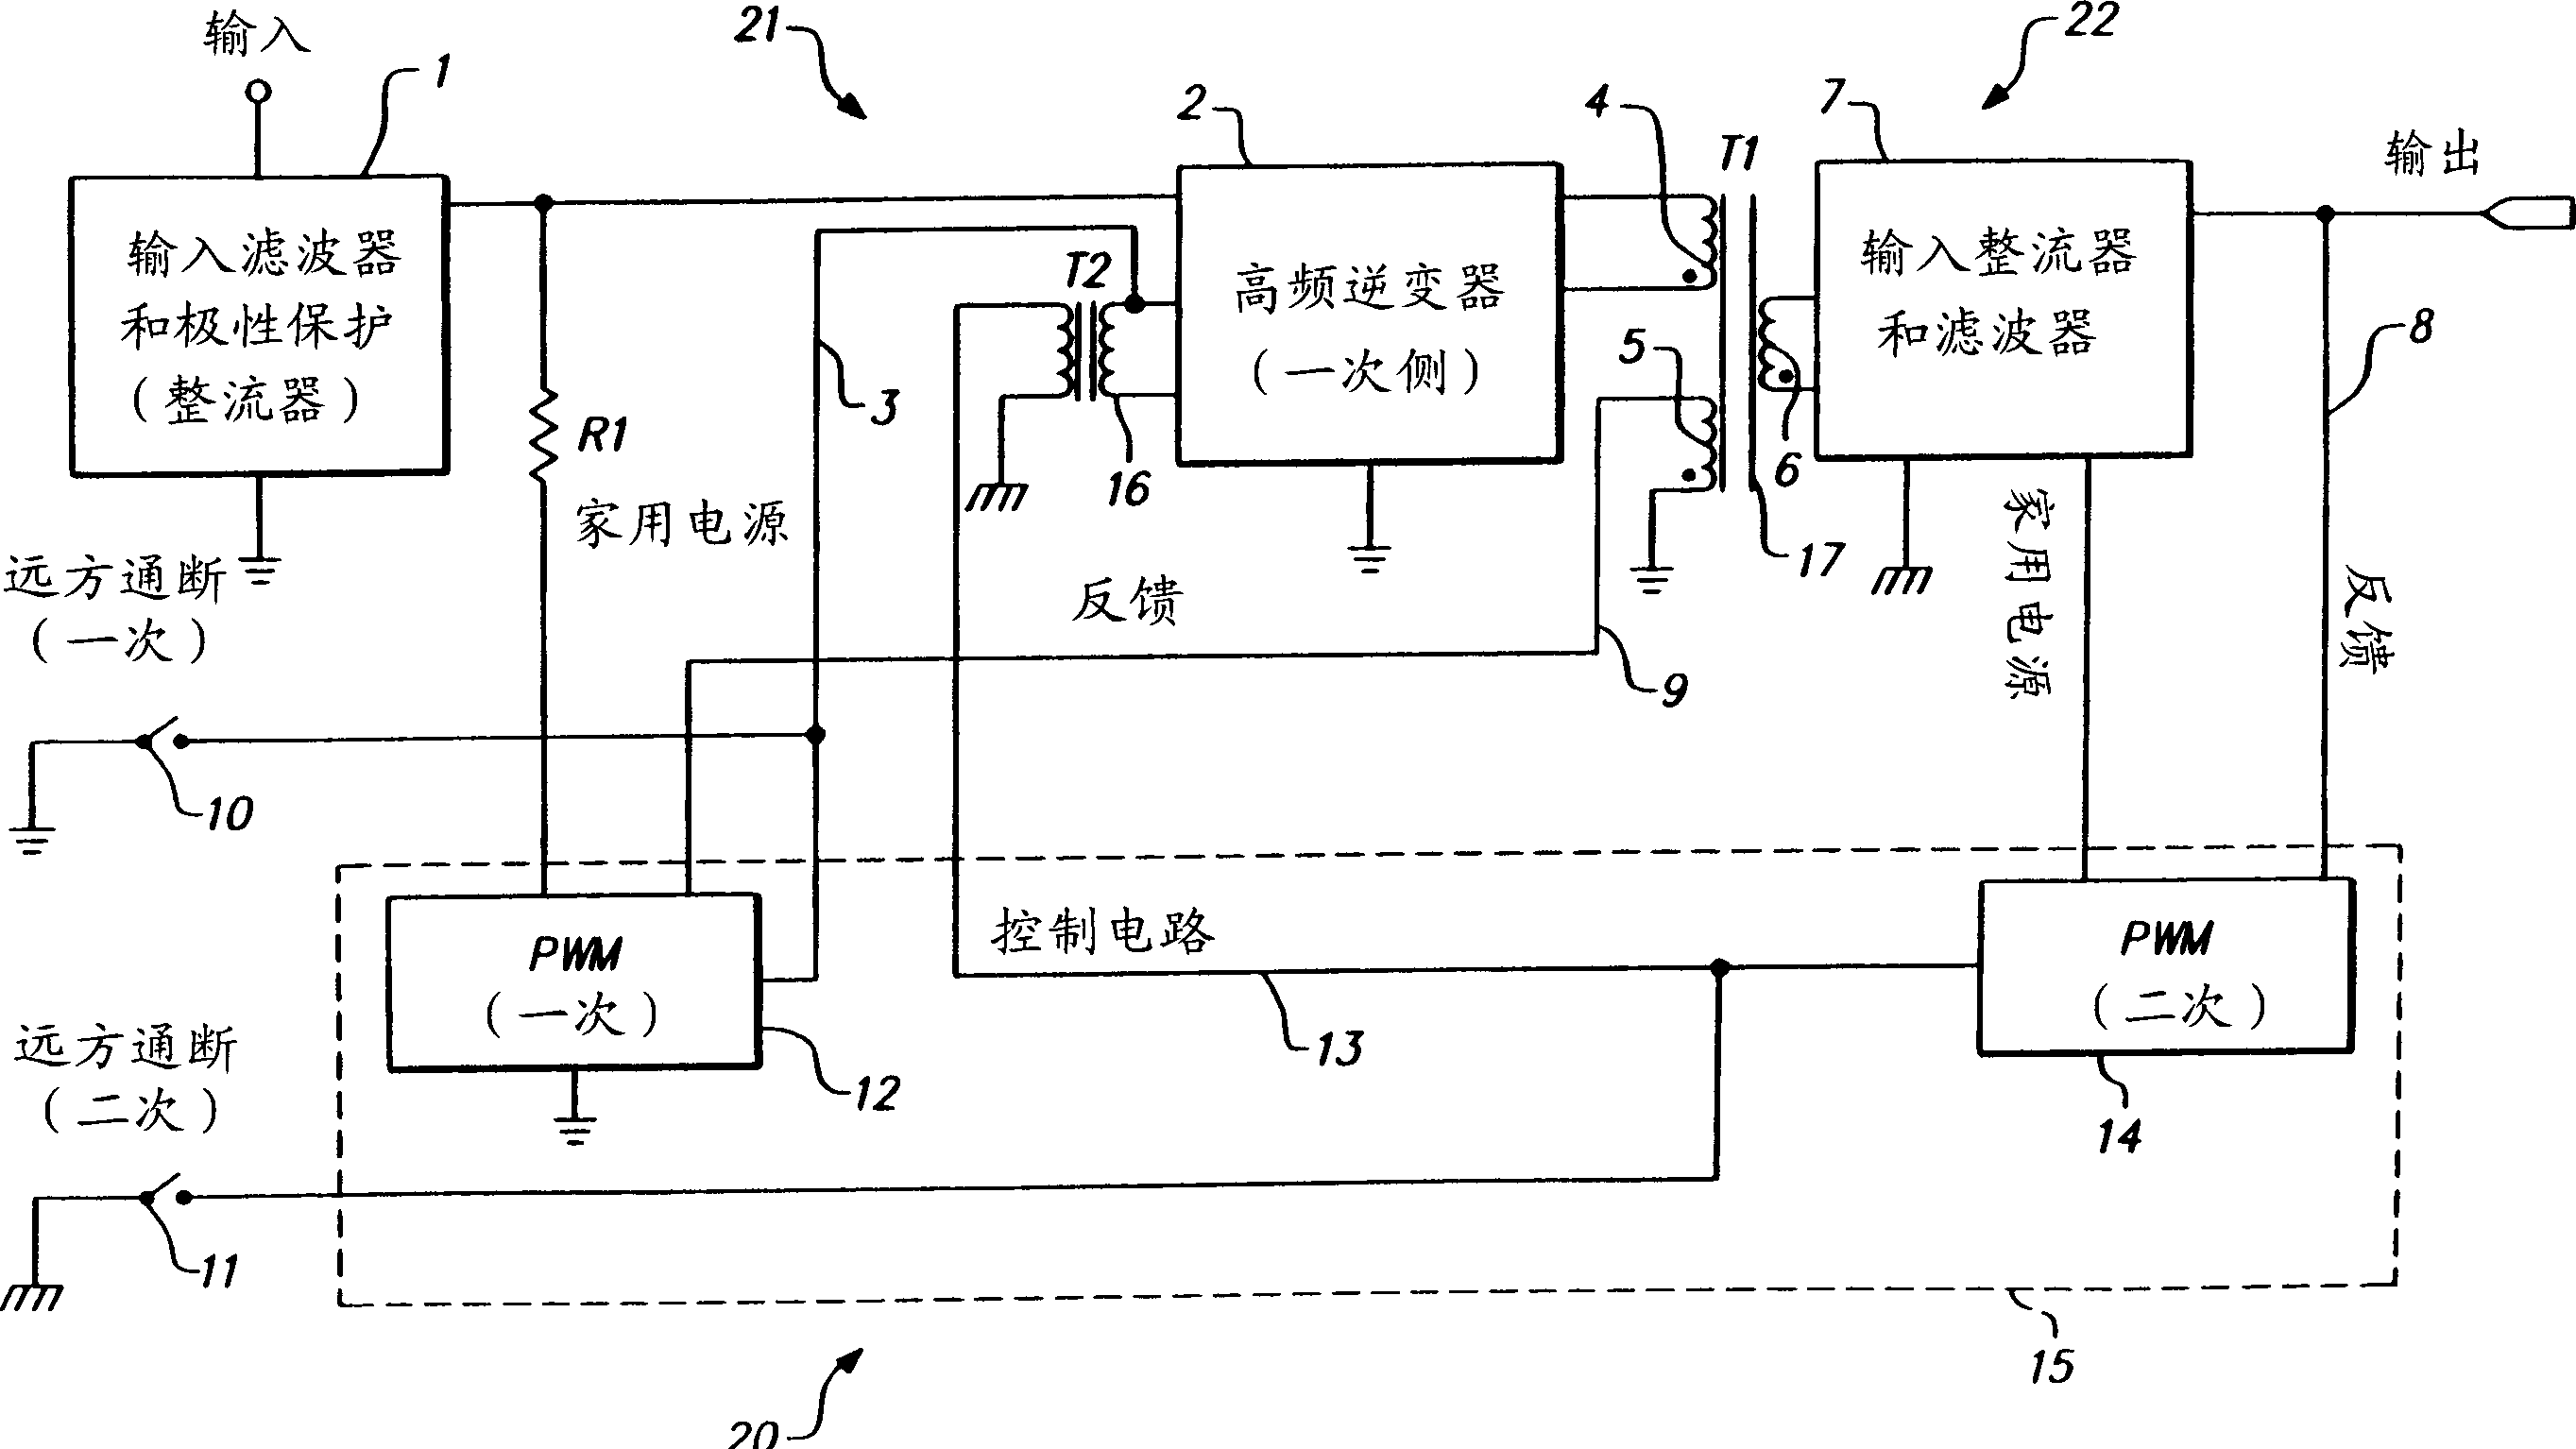 Start-up circuit for flyback converter having secondary pulse width modulation control